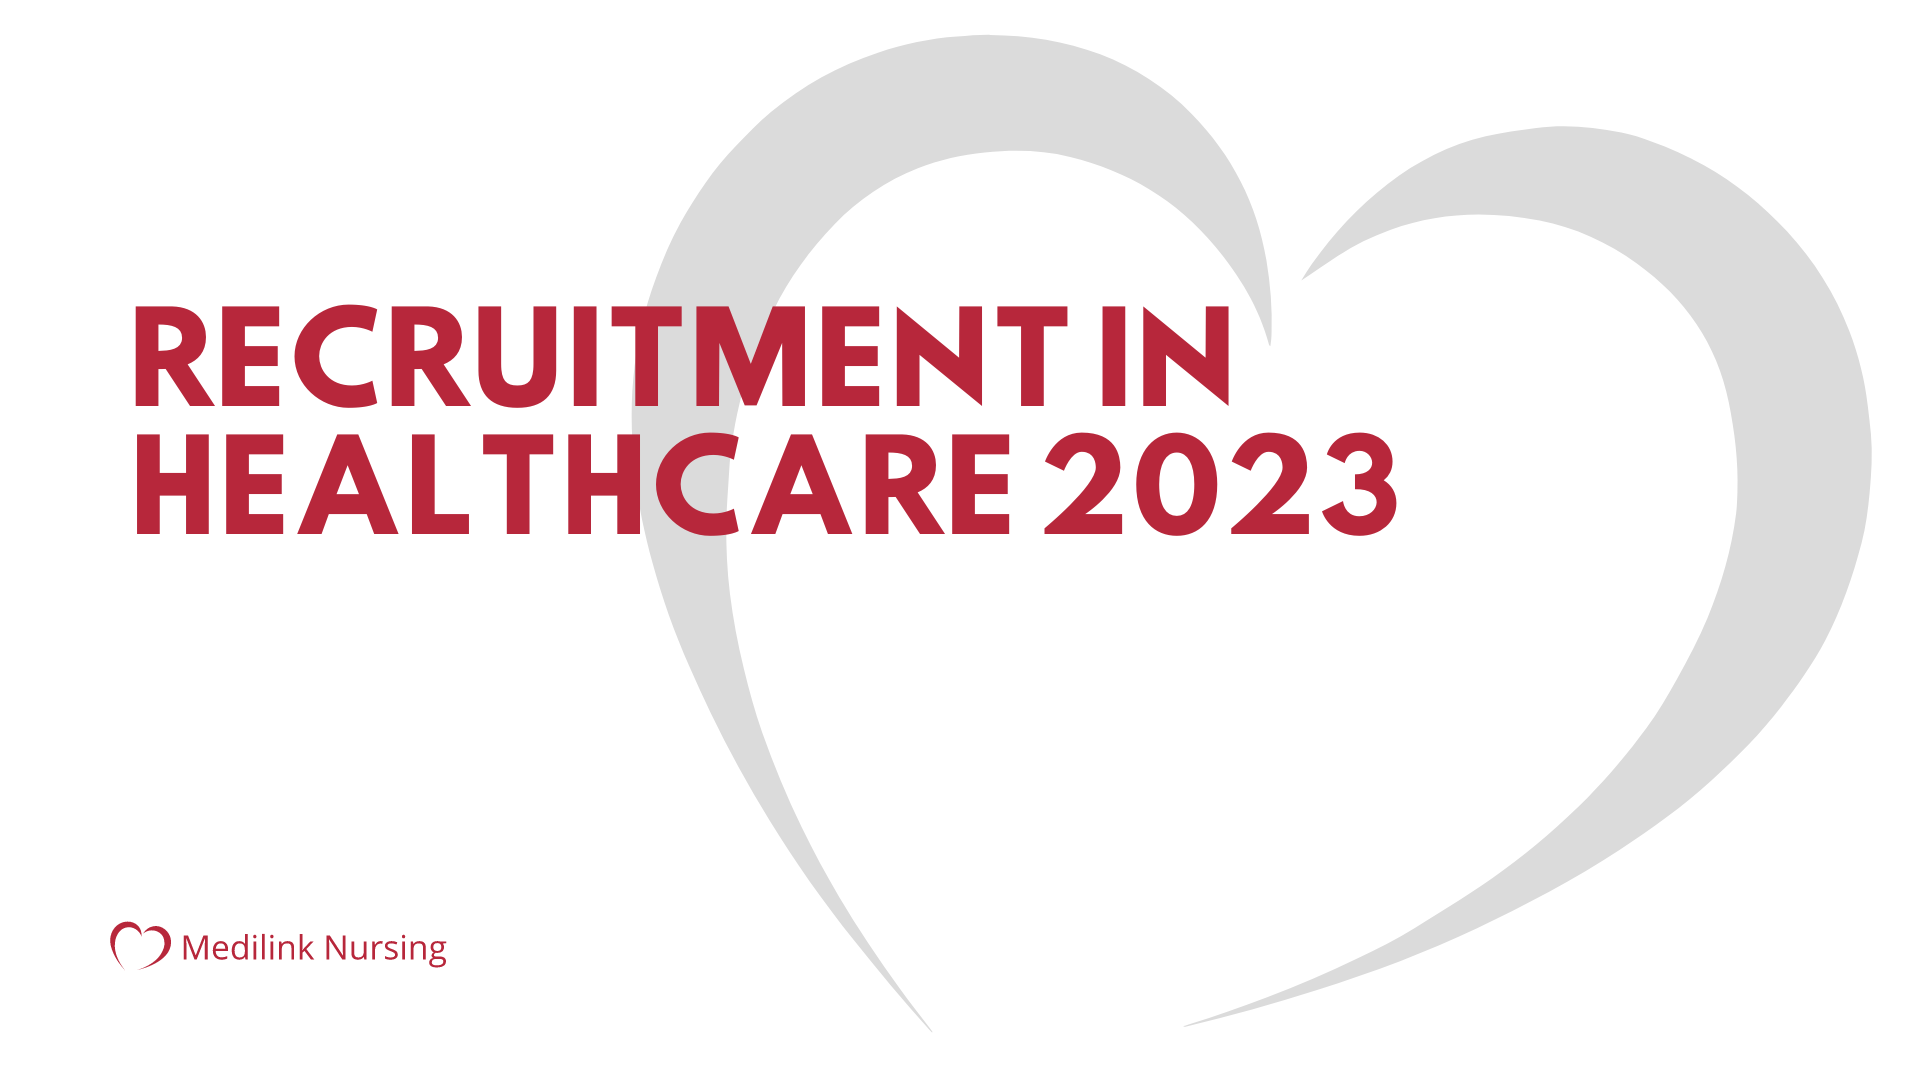 Recruitment In Healthcare 2023 – How Medilink Nursing Can Make It Easier To Find Your Perfect Role